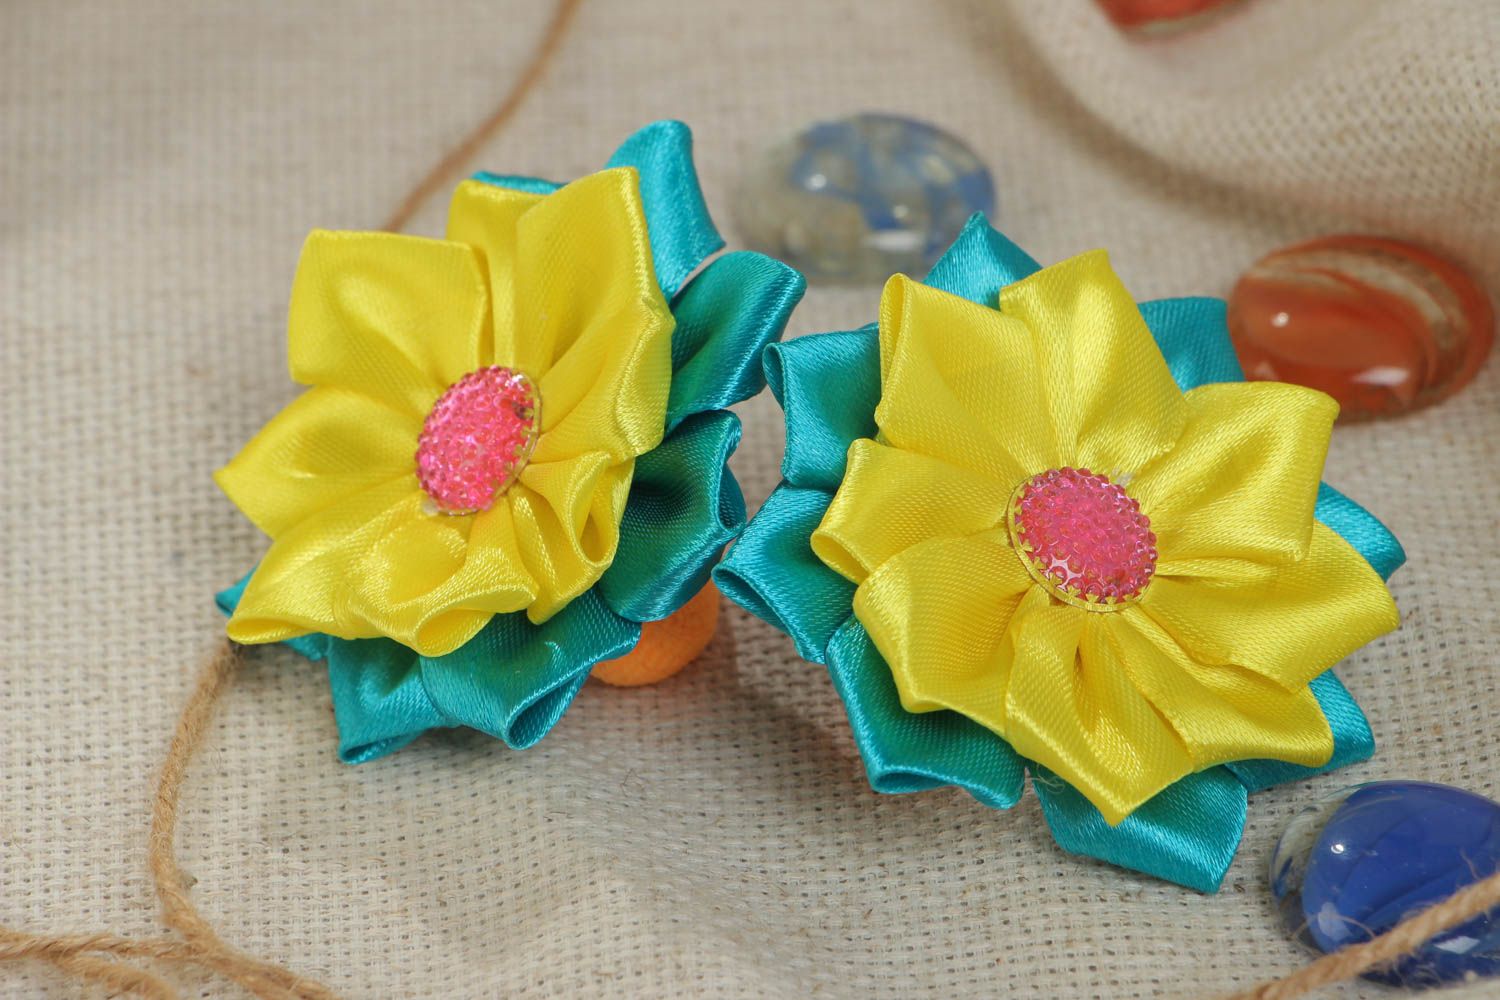 Set of 2 handmade colorful bright elastic hair bands with kanzashi flowers photo 1